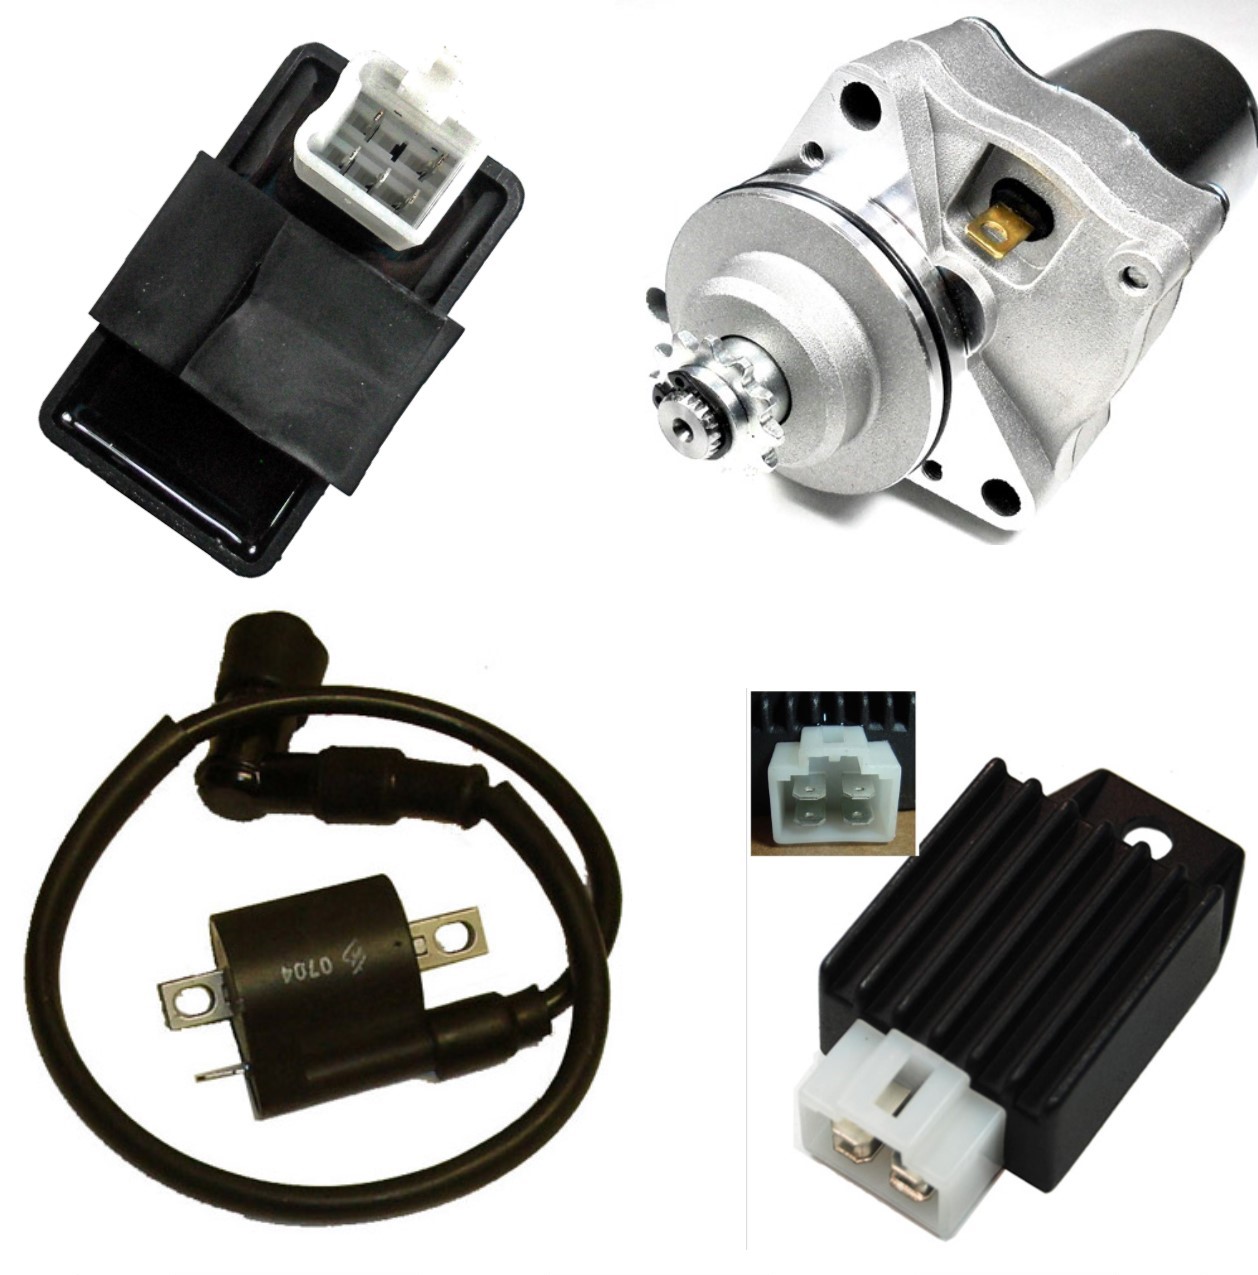 Electrical Parts Starters-CDI-Coils-Relays-Stators 90cc ATV-Dirtbikes